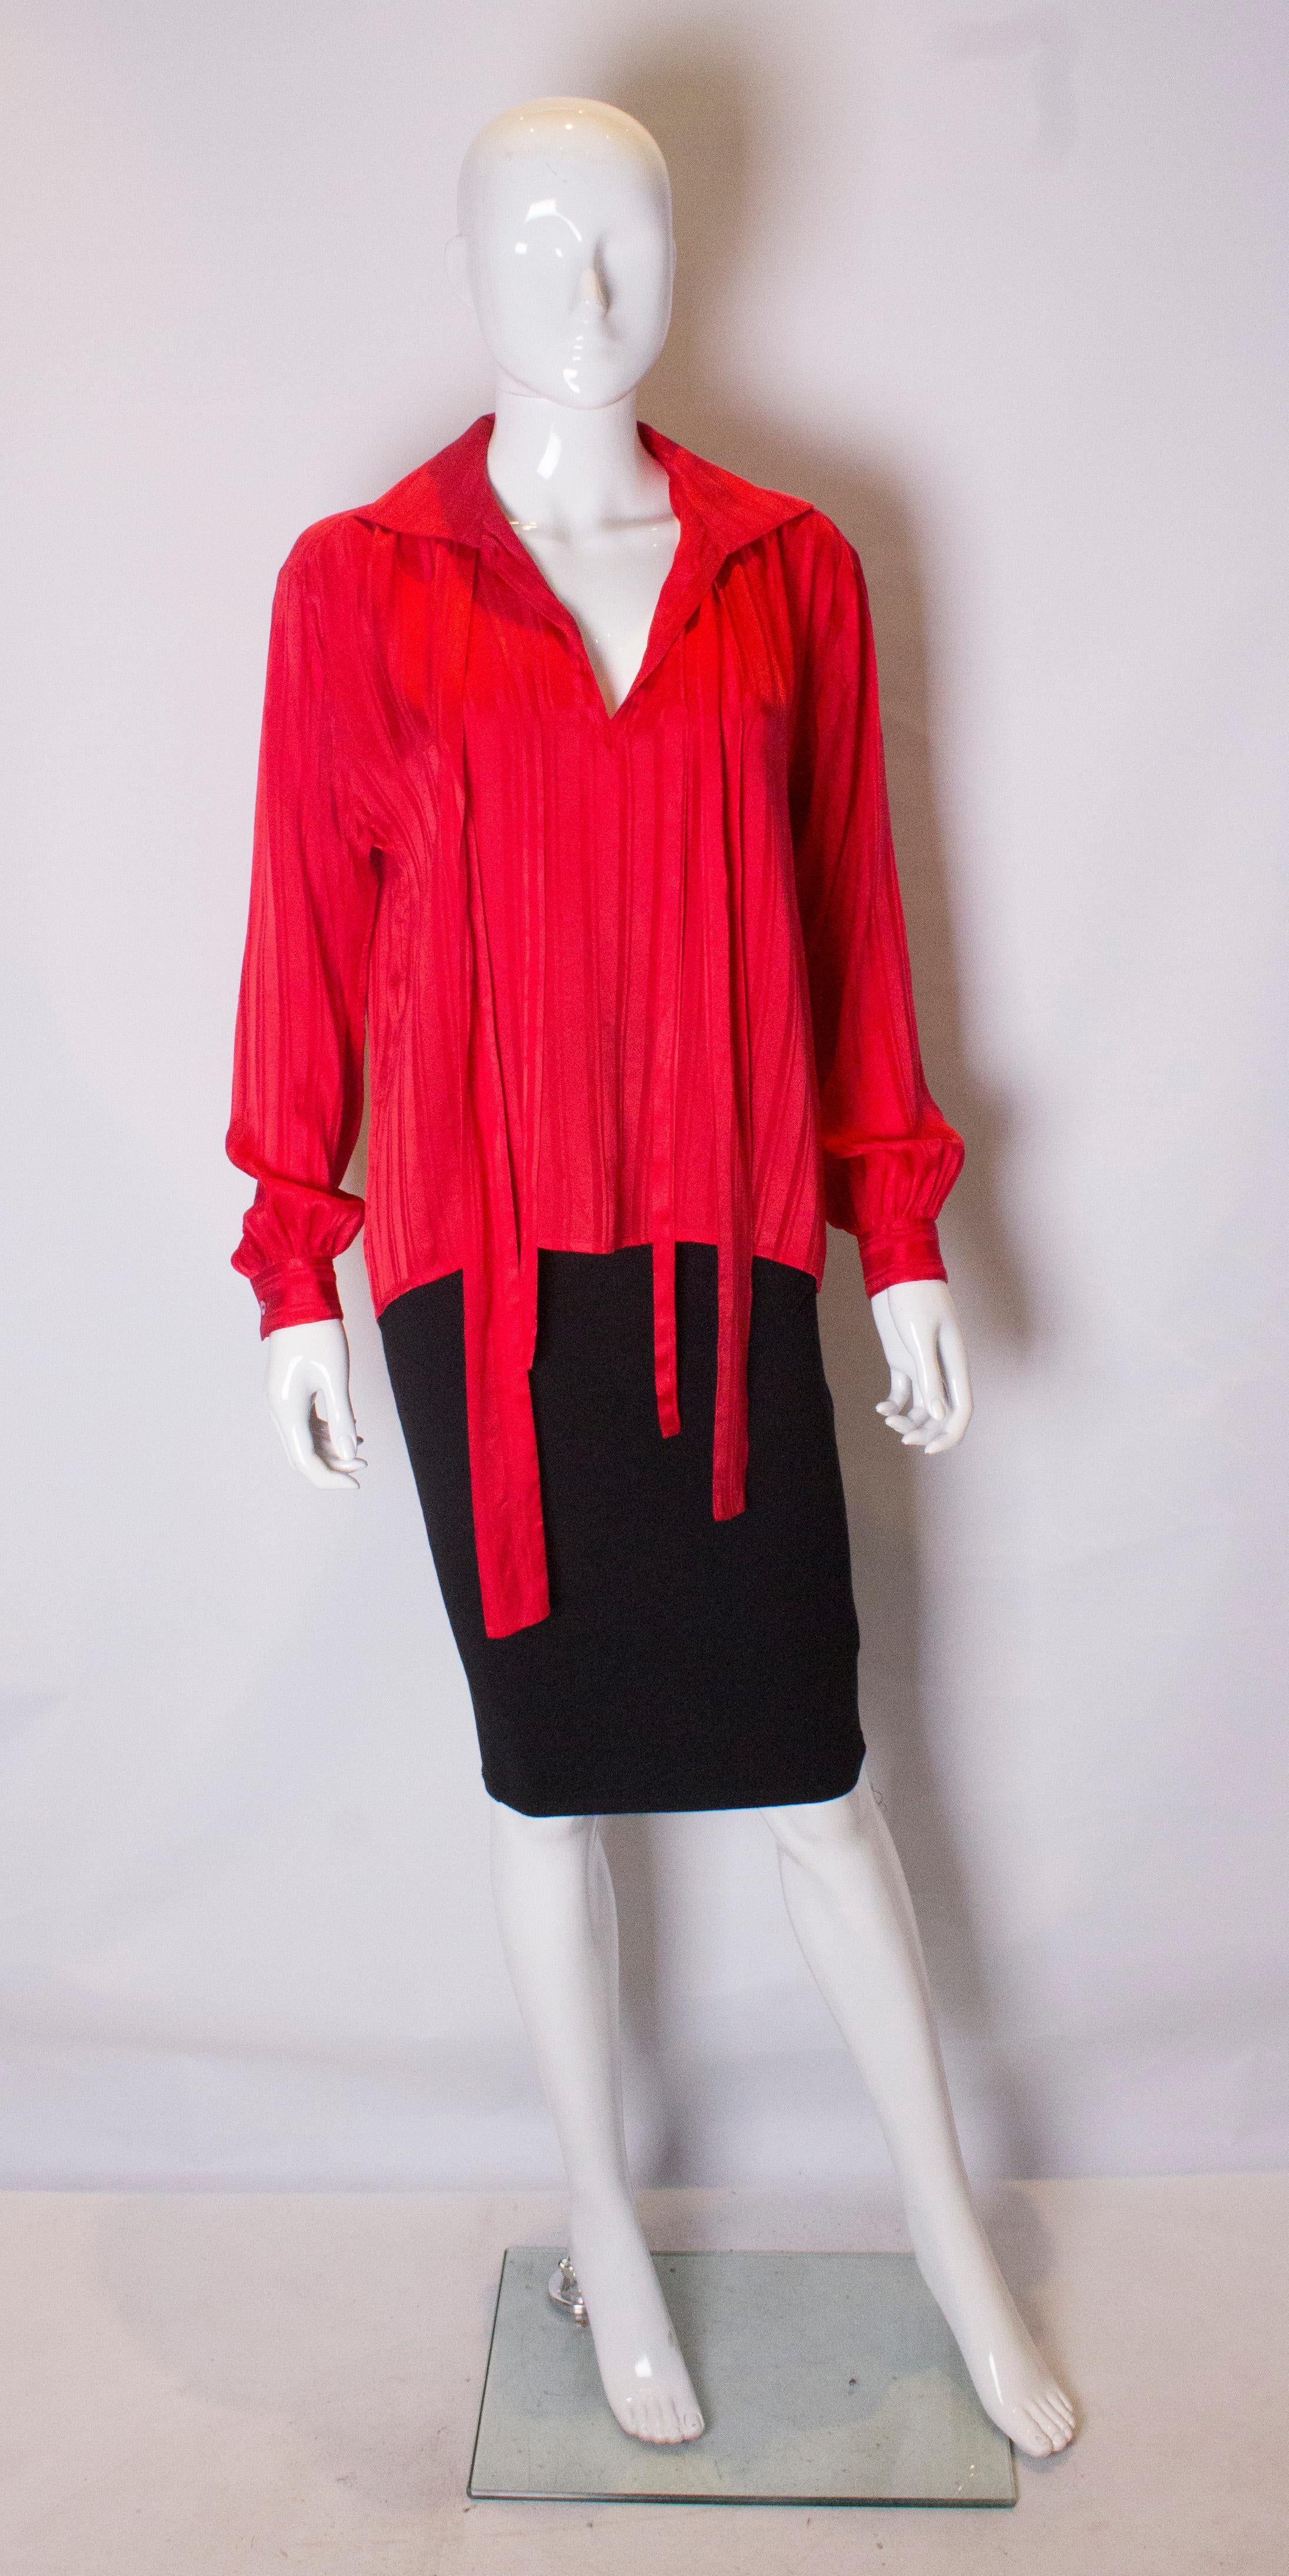 A cut red silk blouse by Yves Saint Laurent Rive Gauche line. The blouse is in a red self  stripe silk, and has a v neckline, single button cuffs and gathering from the yoke at the back.